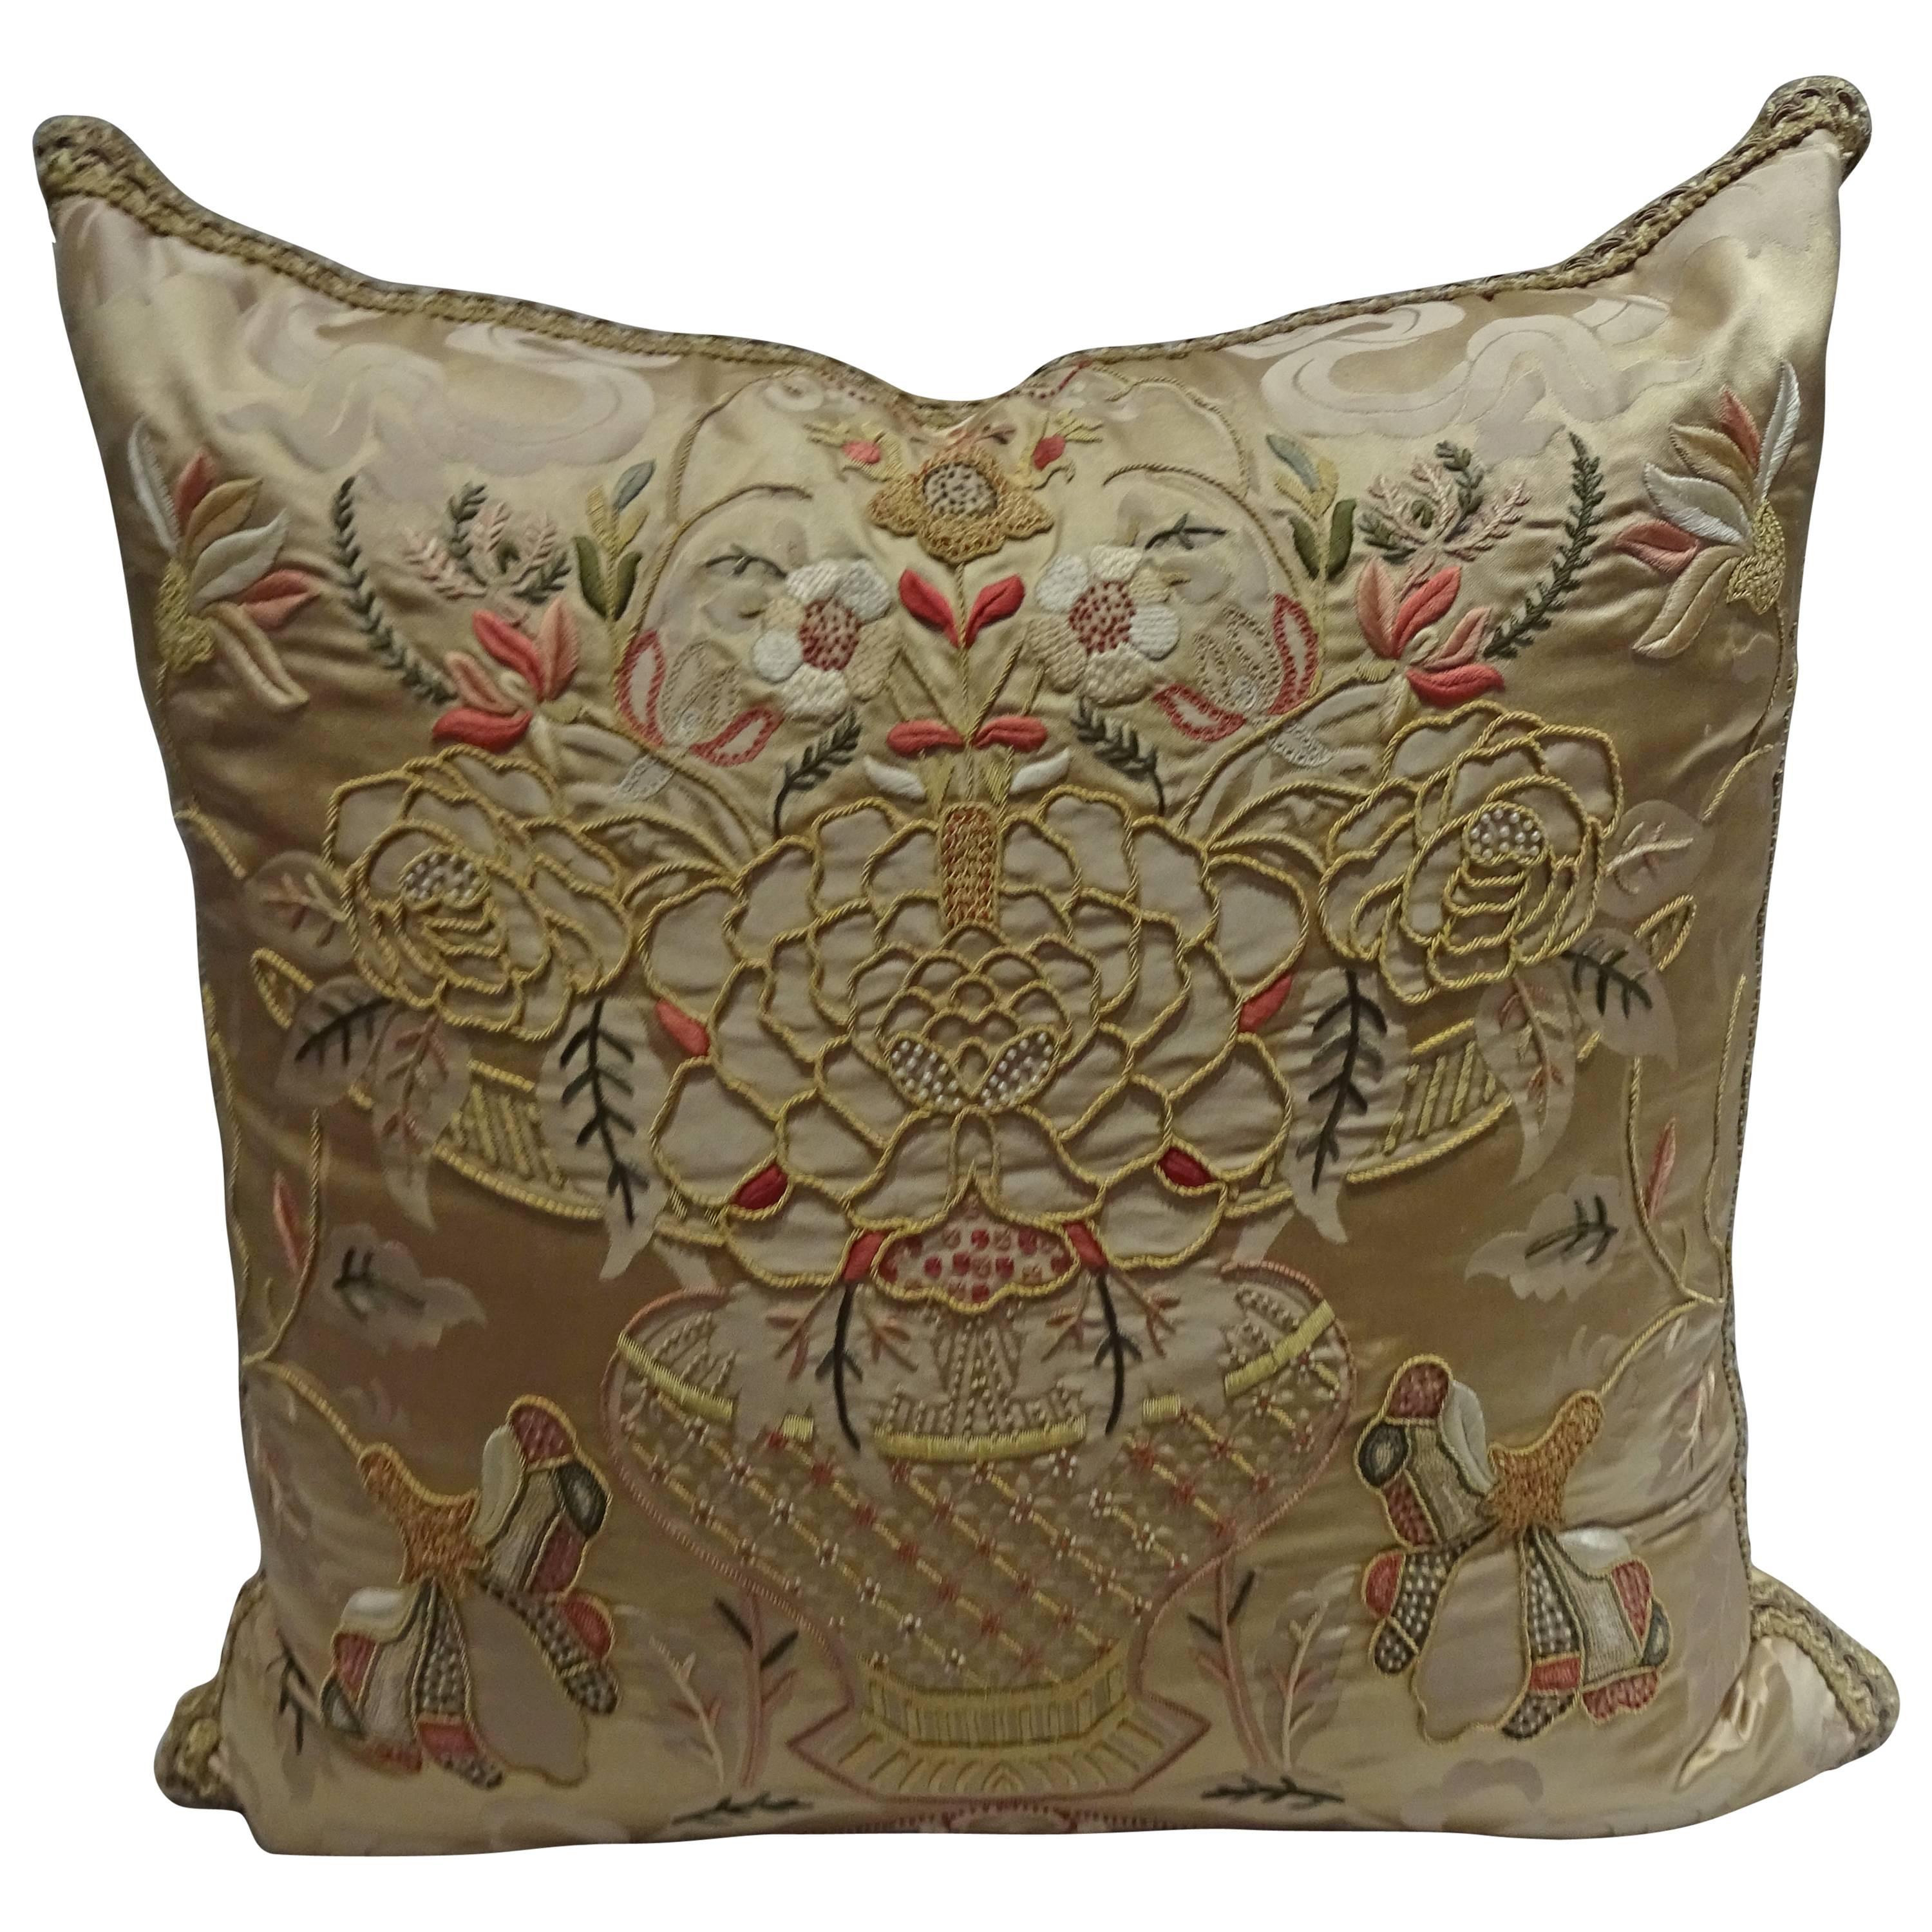 Magnificent Embroidered Pillows, Scalamandre Fabric